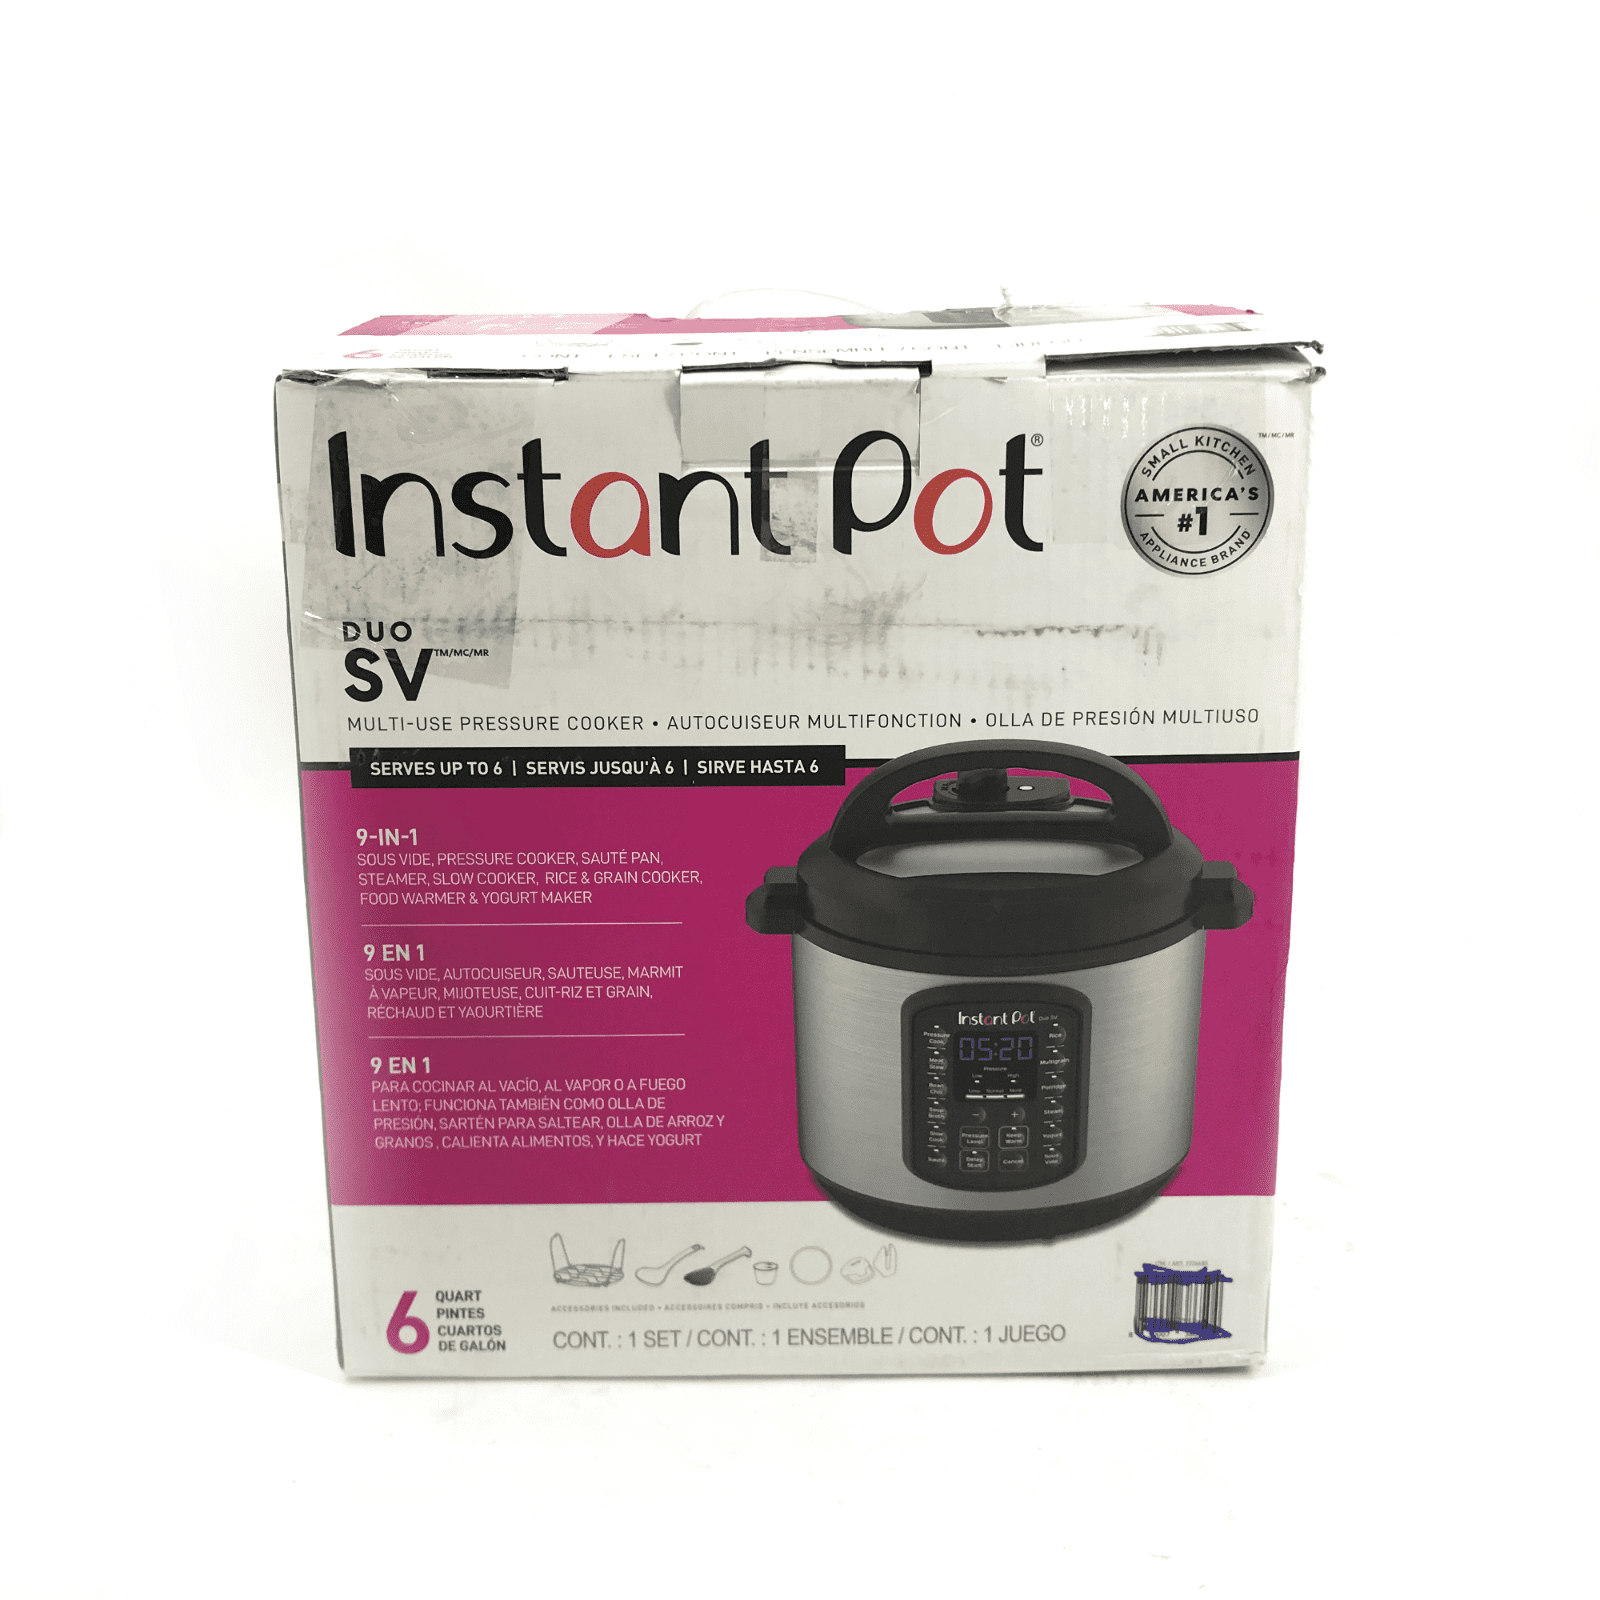 Instant Pot, 6 Qt Duo 7-in-1 Multi-Use Pressure Cooker and Accessories -  appliances - by owner - sale - craigslist